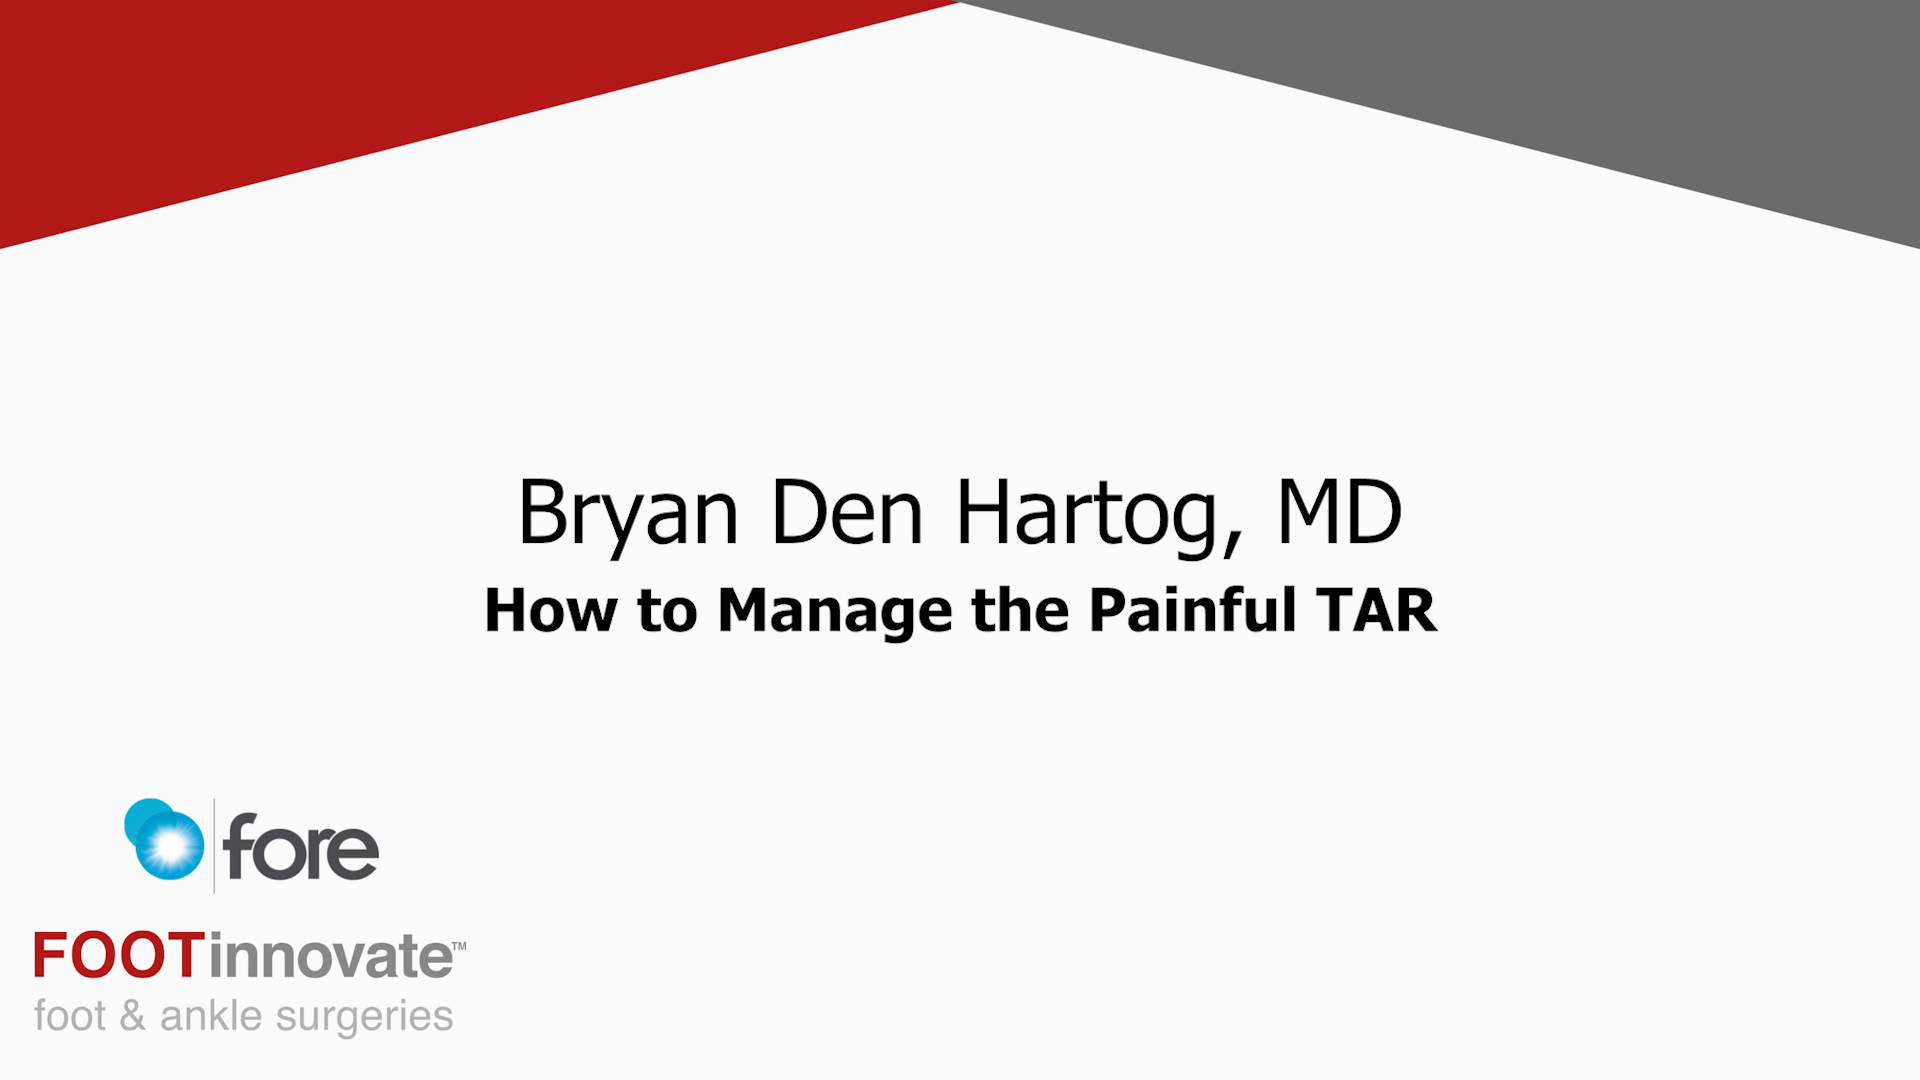 FORE TAR Summit: How to Manage the Painful TAR